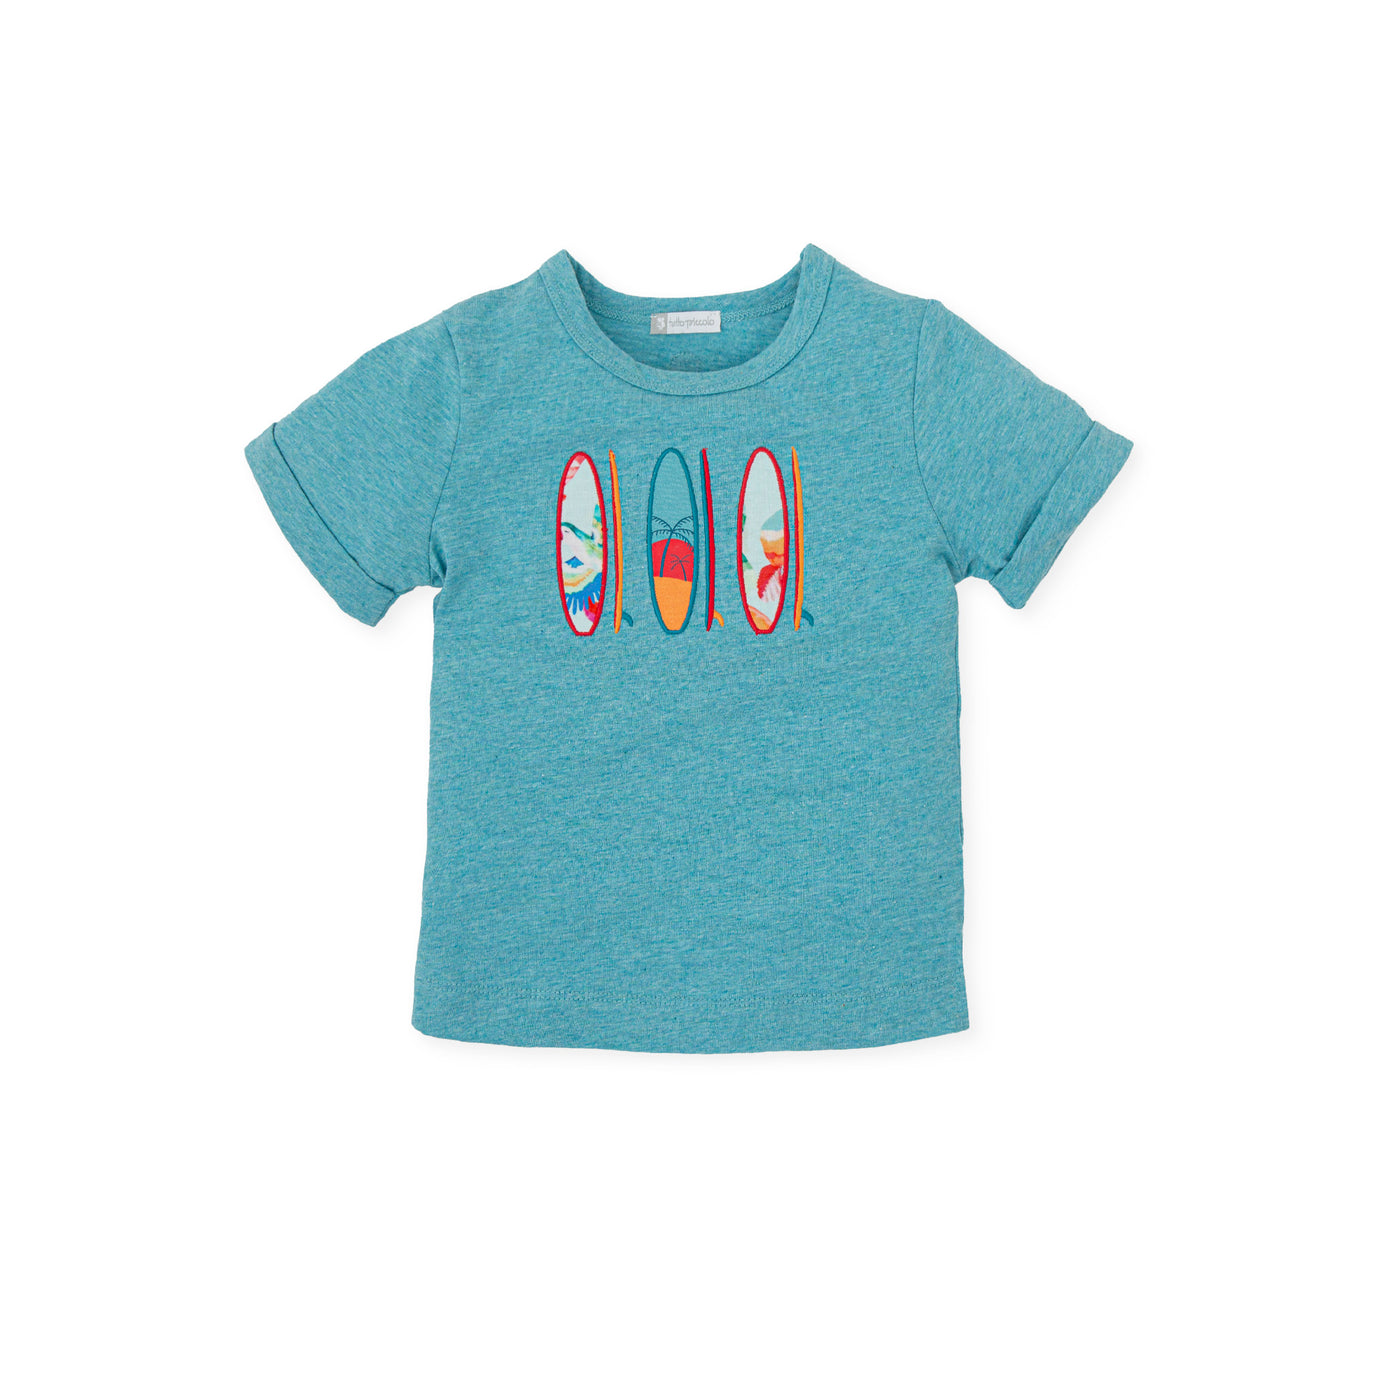 Turquoise T-Shirt By Tutto Piccolo